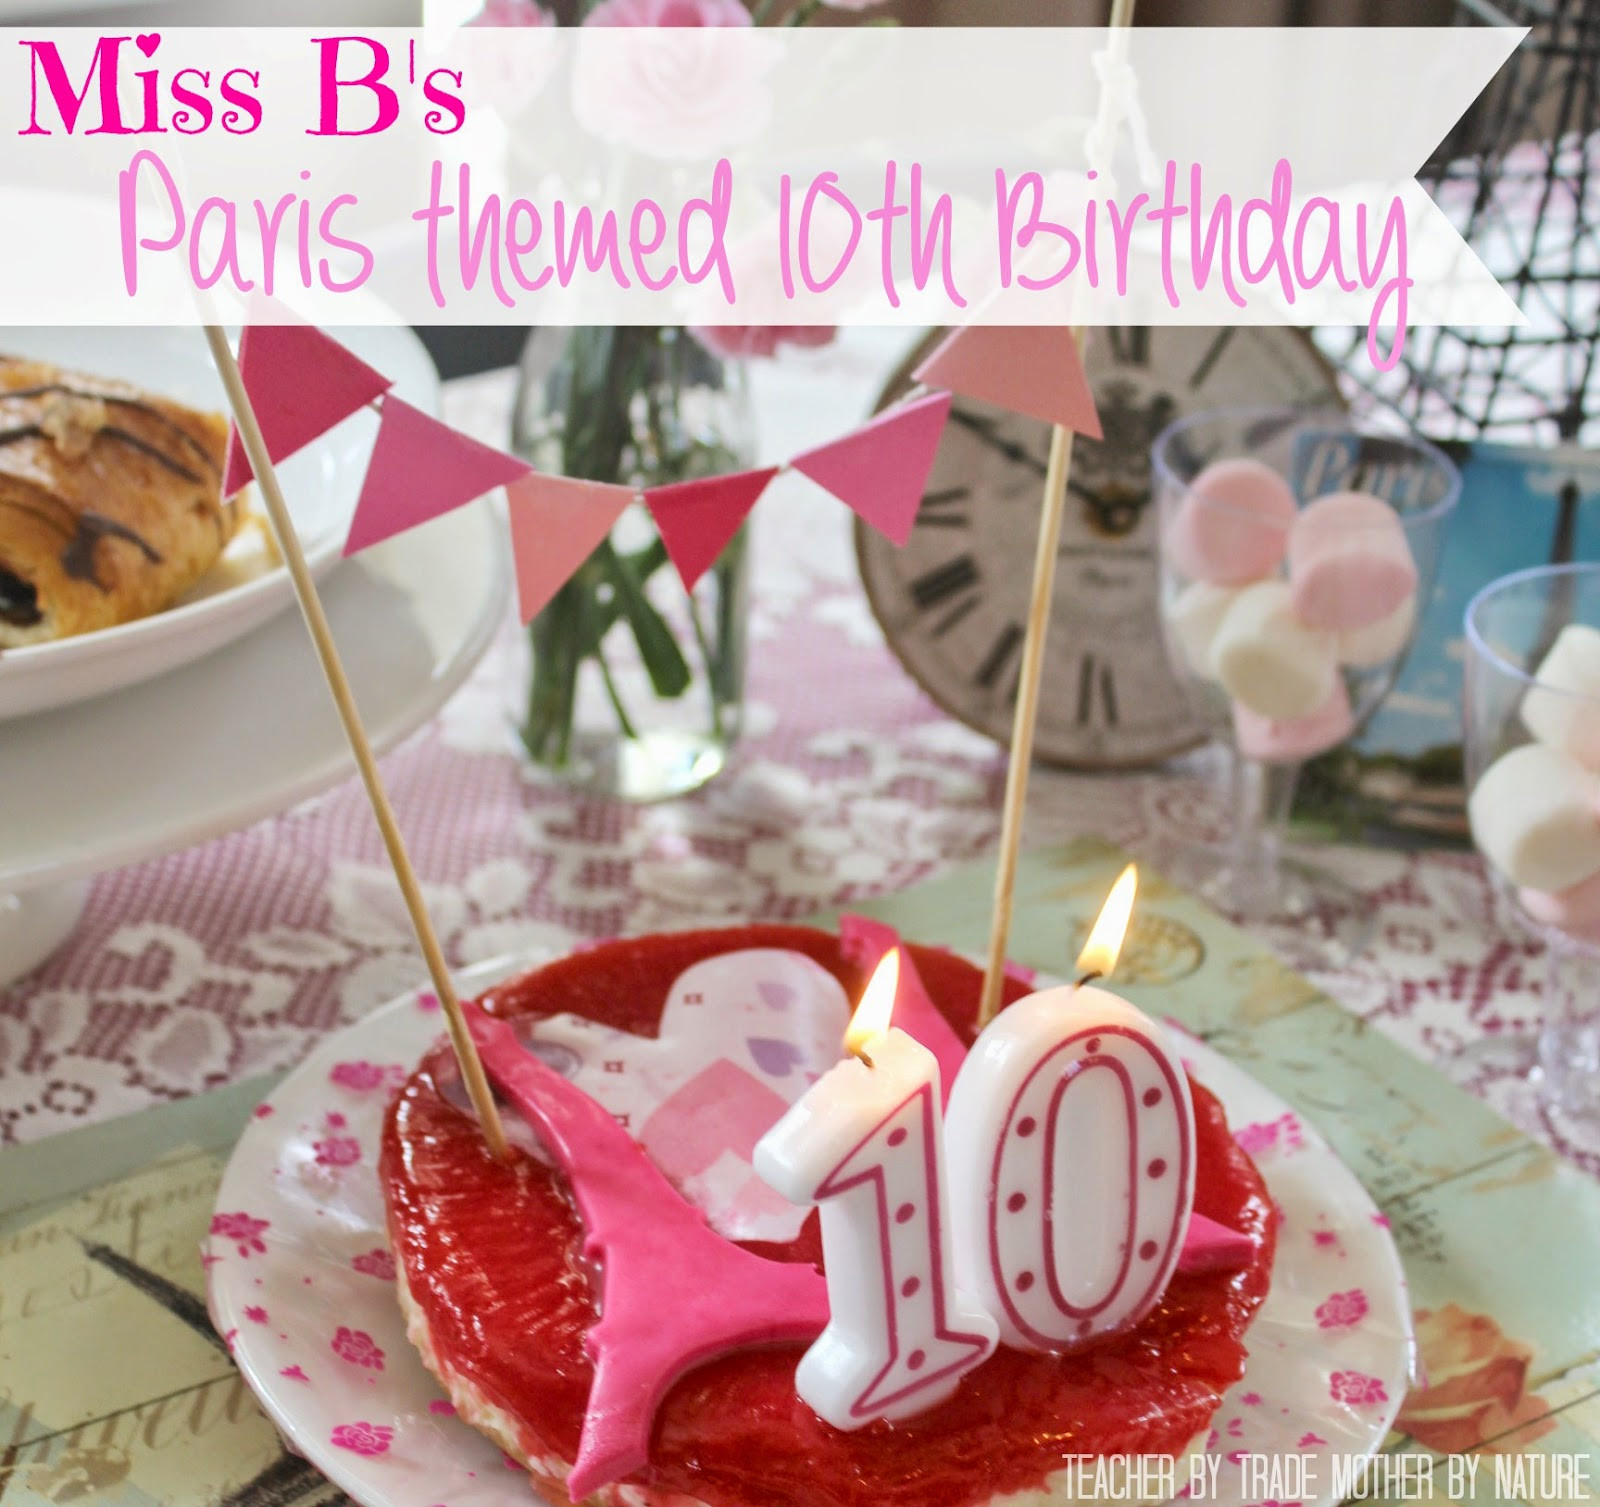 Paris Themed Party For Kids
 Kids Parties Miss B s Paris themed 10th Birthday